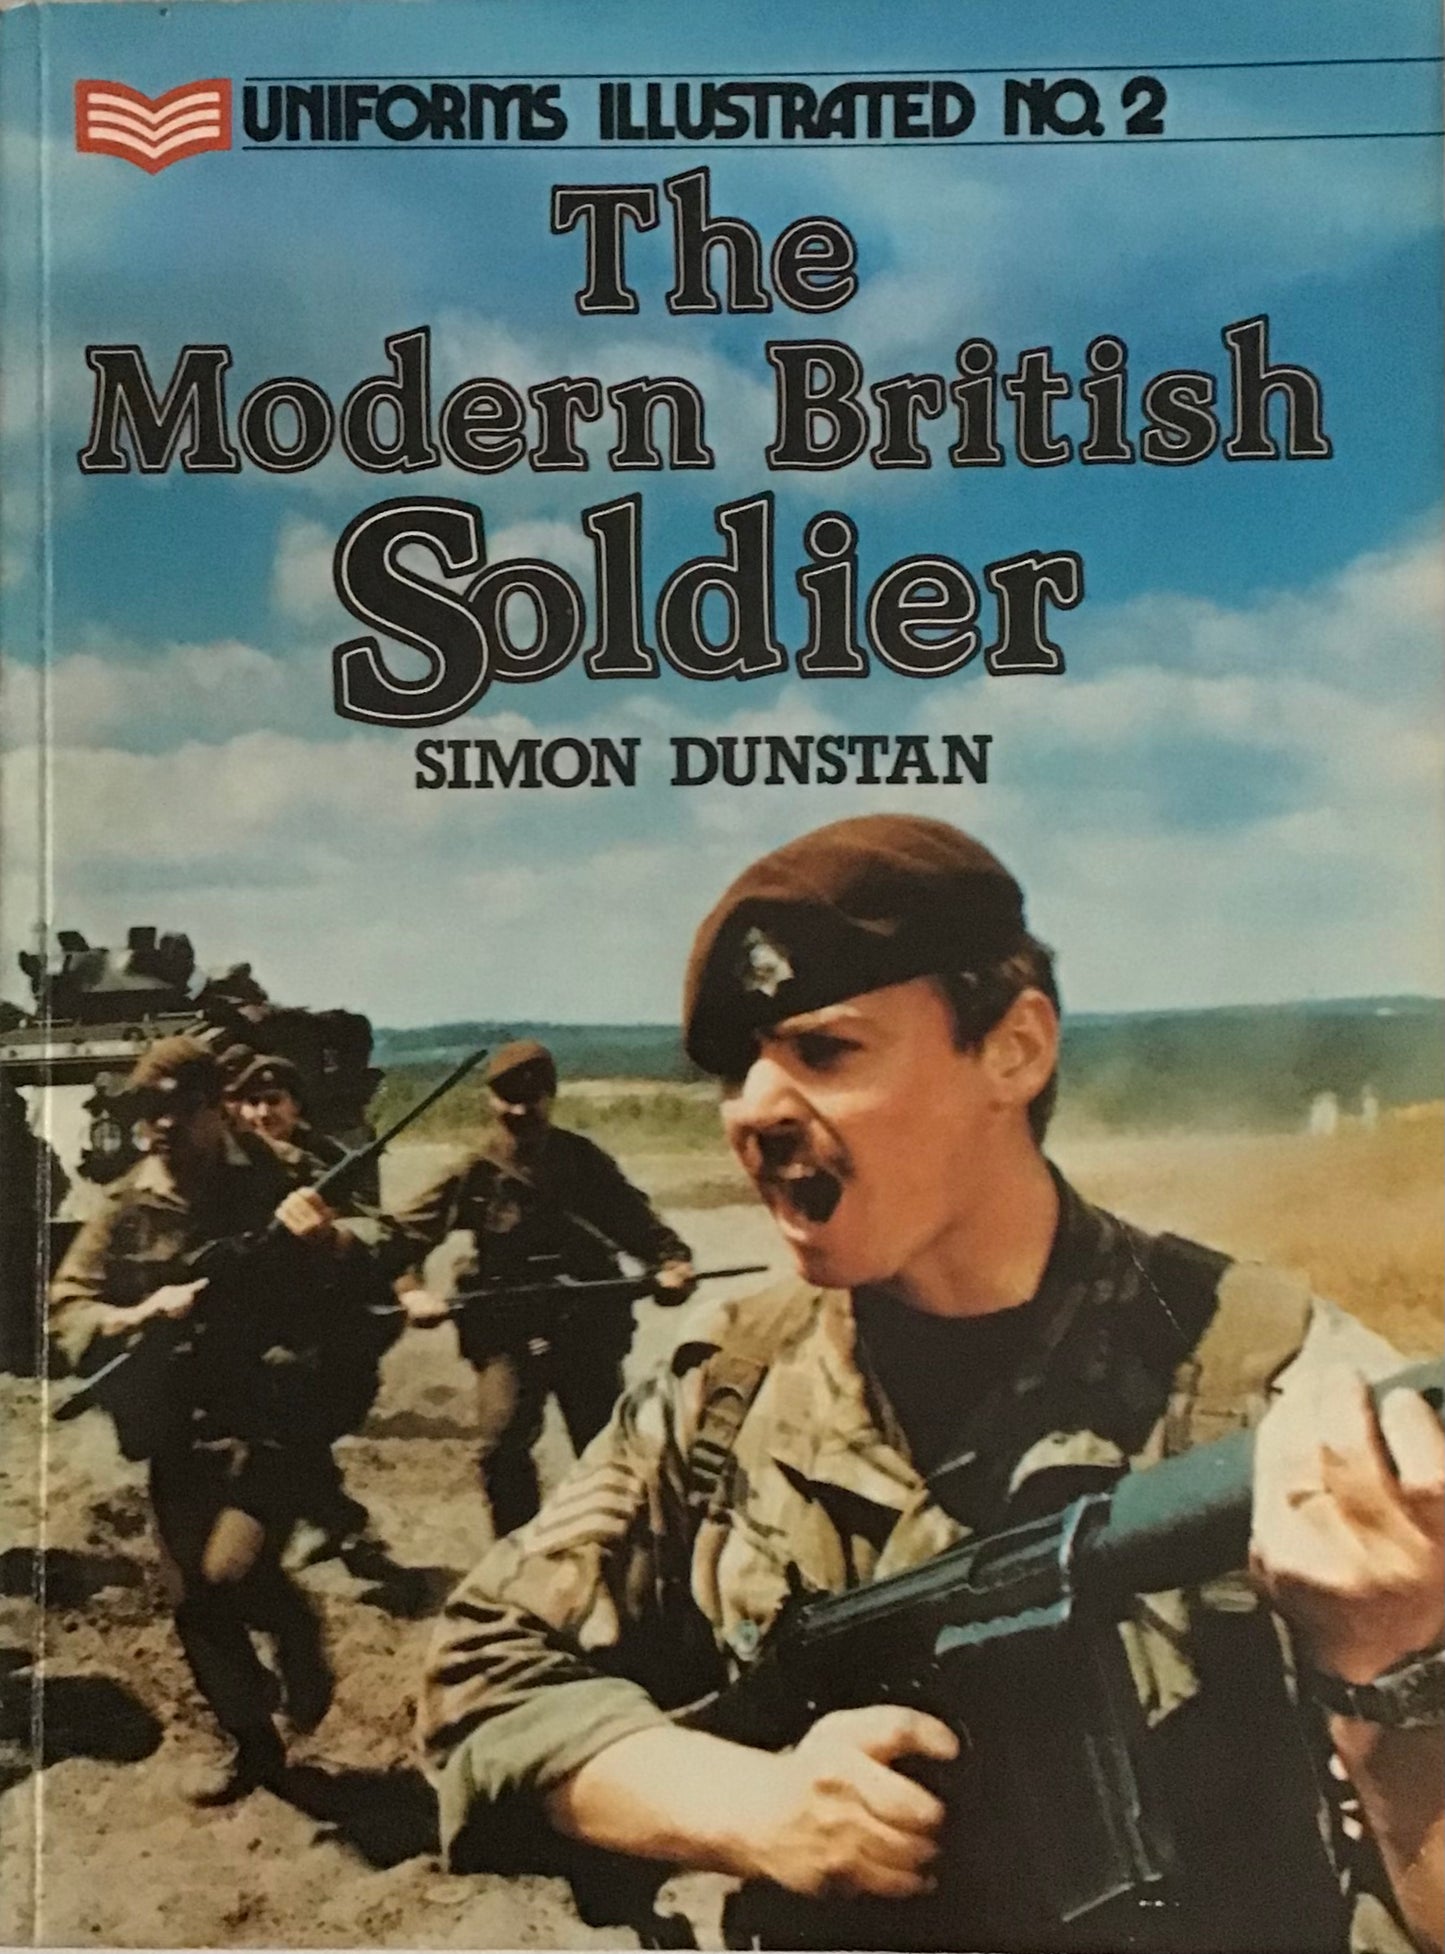 Uniforms Illustrated No.2: The Modern British Soldier by Simon Dunstan - Chester Model Centre